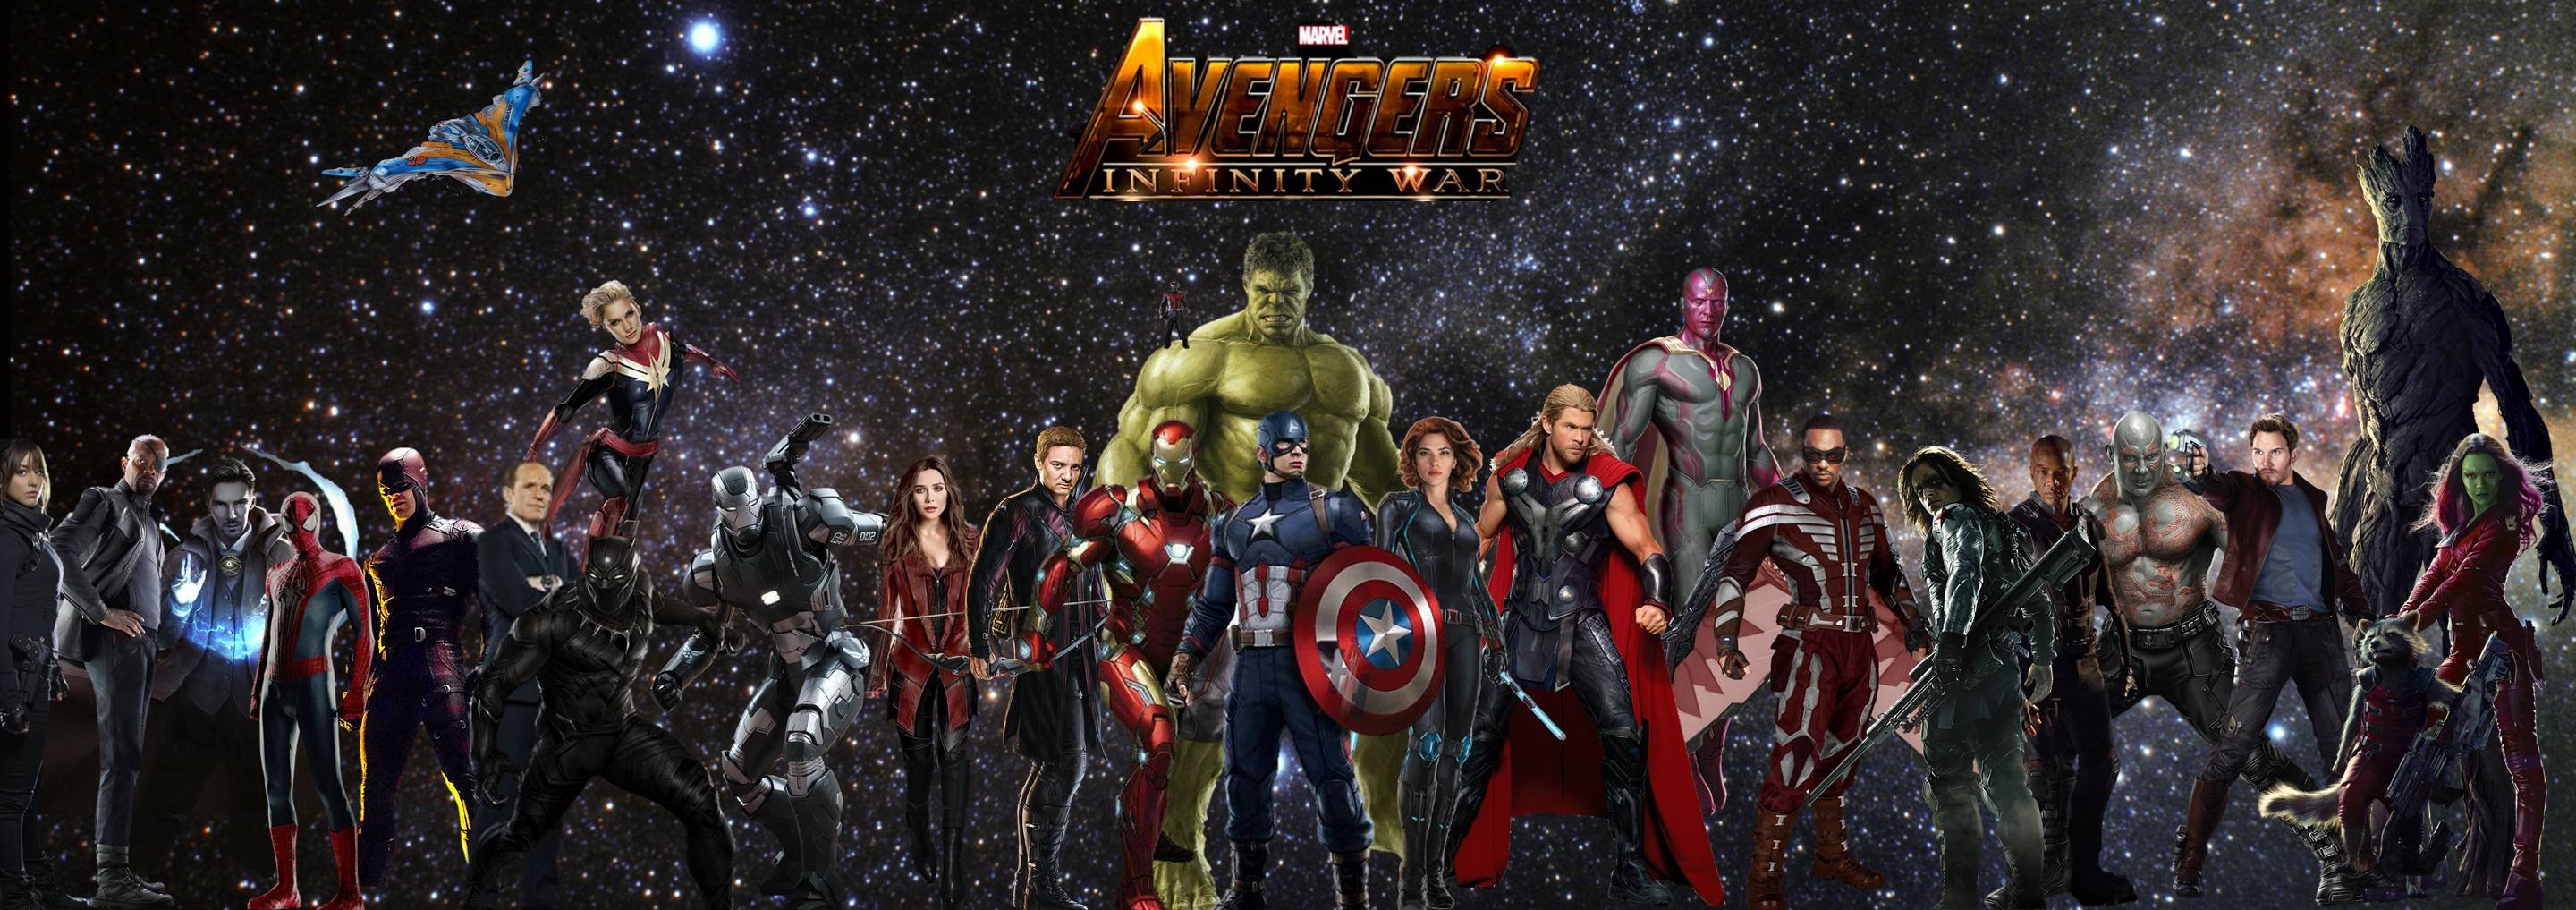 Avengers: Infinity War download the new